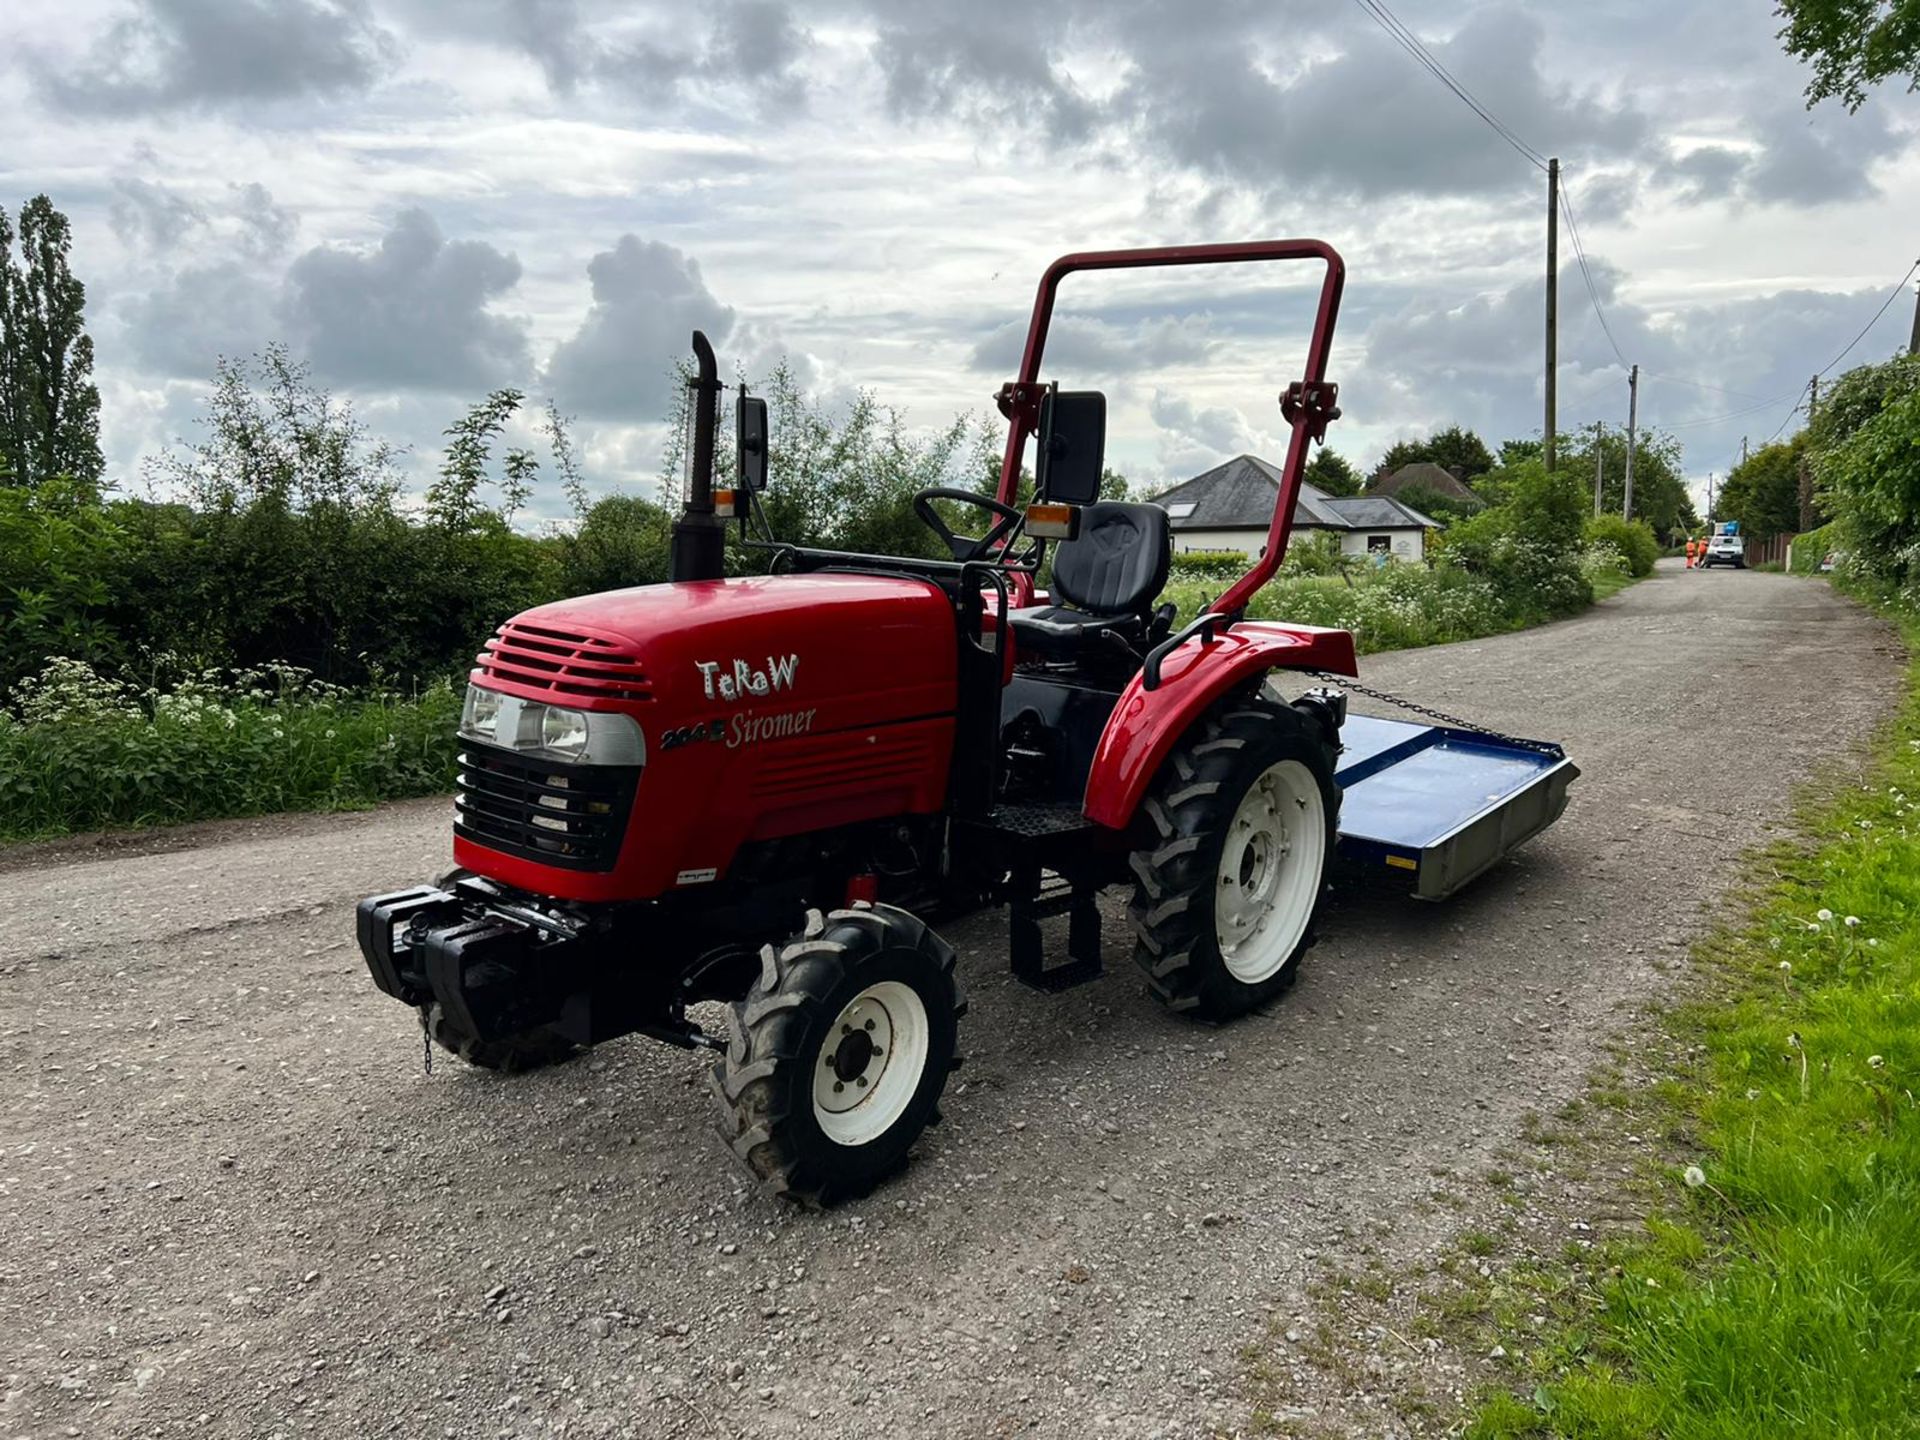 Siromer 204E 20HP 4WD Compact Tractor With 5FT Beaco Grass Topper - 68 Plate """"PLUS VAT"""" - Image 4 of 22